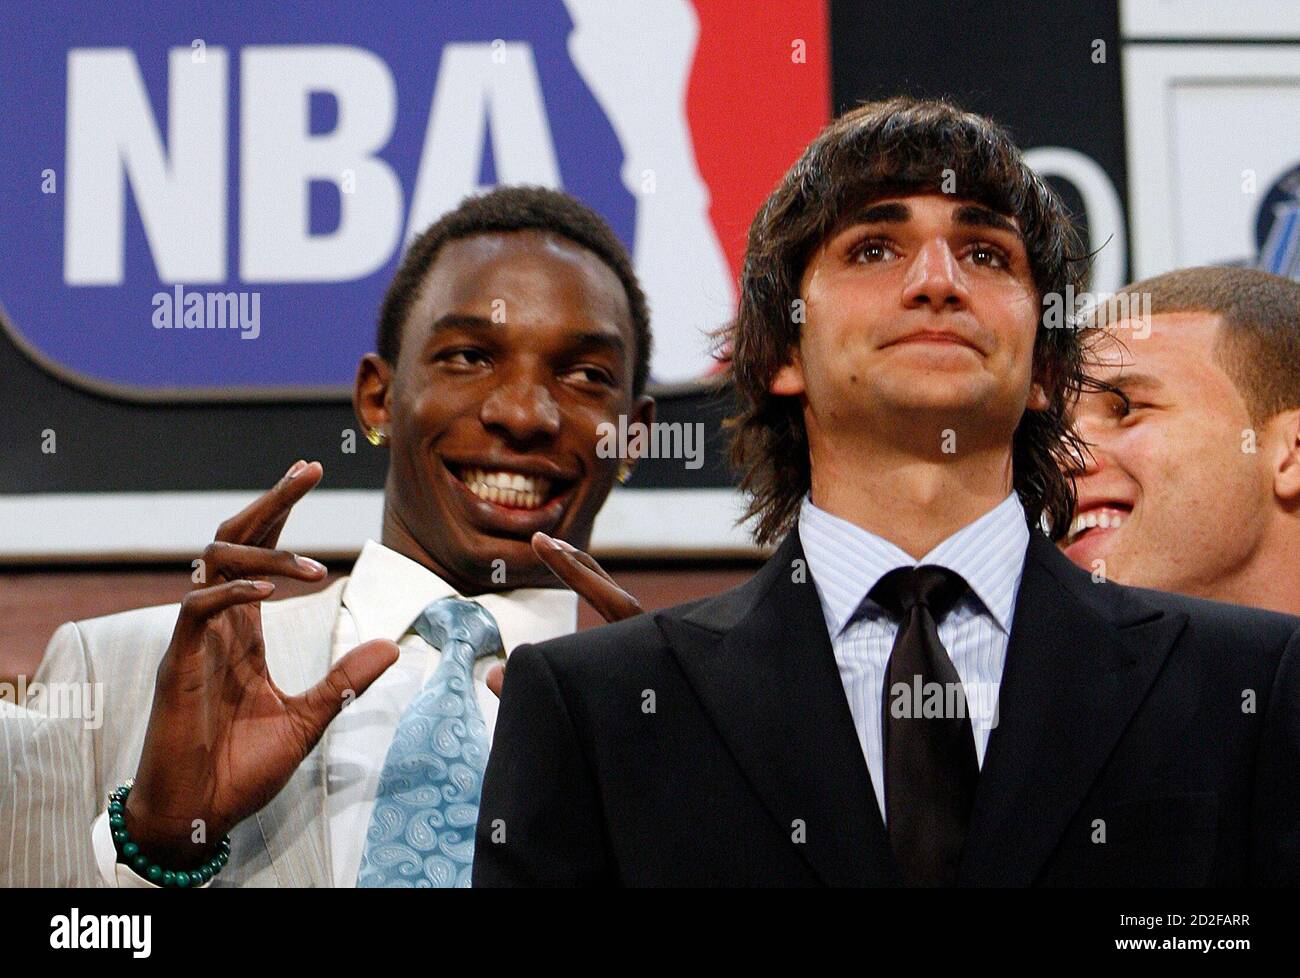 Players Ricky Rubio from Spain (C), Hasheem Thabeet (L) and Blake Griffin  (R) joke together on stage before the start of the 2009 NBA Draft in New  York, June 25, 2009. REUTERS/Lucas